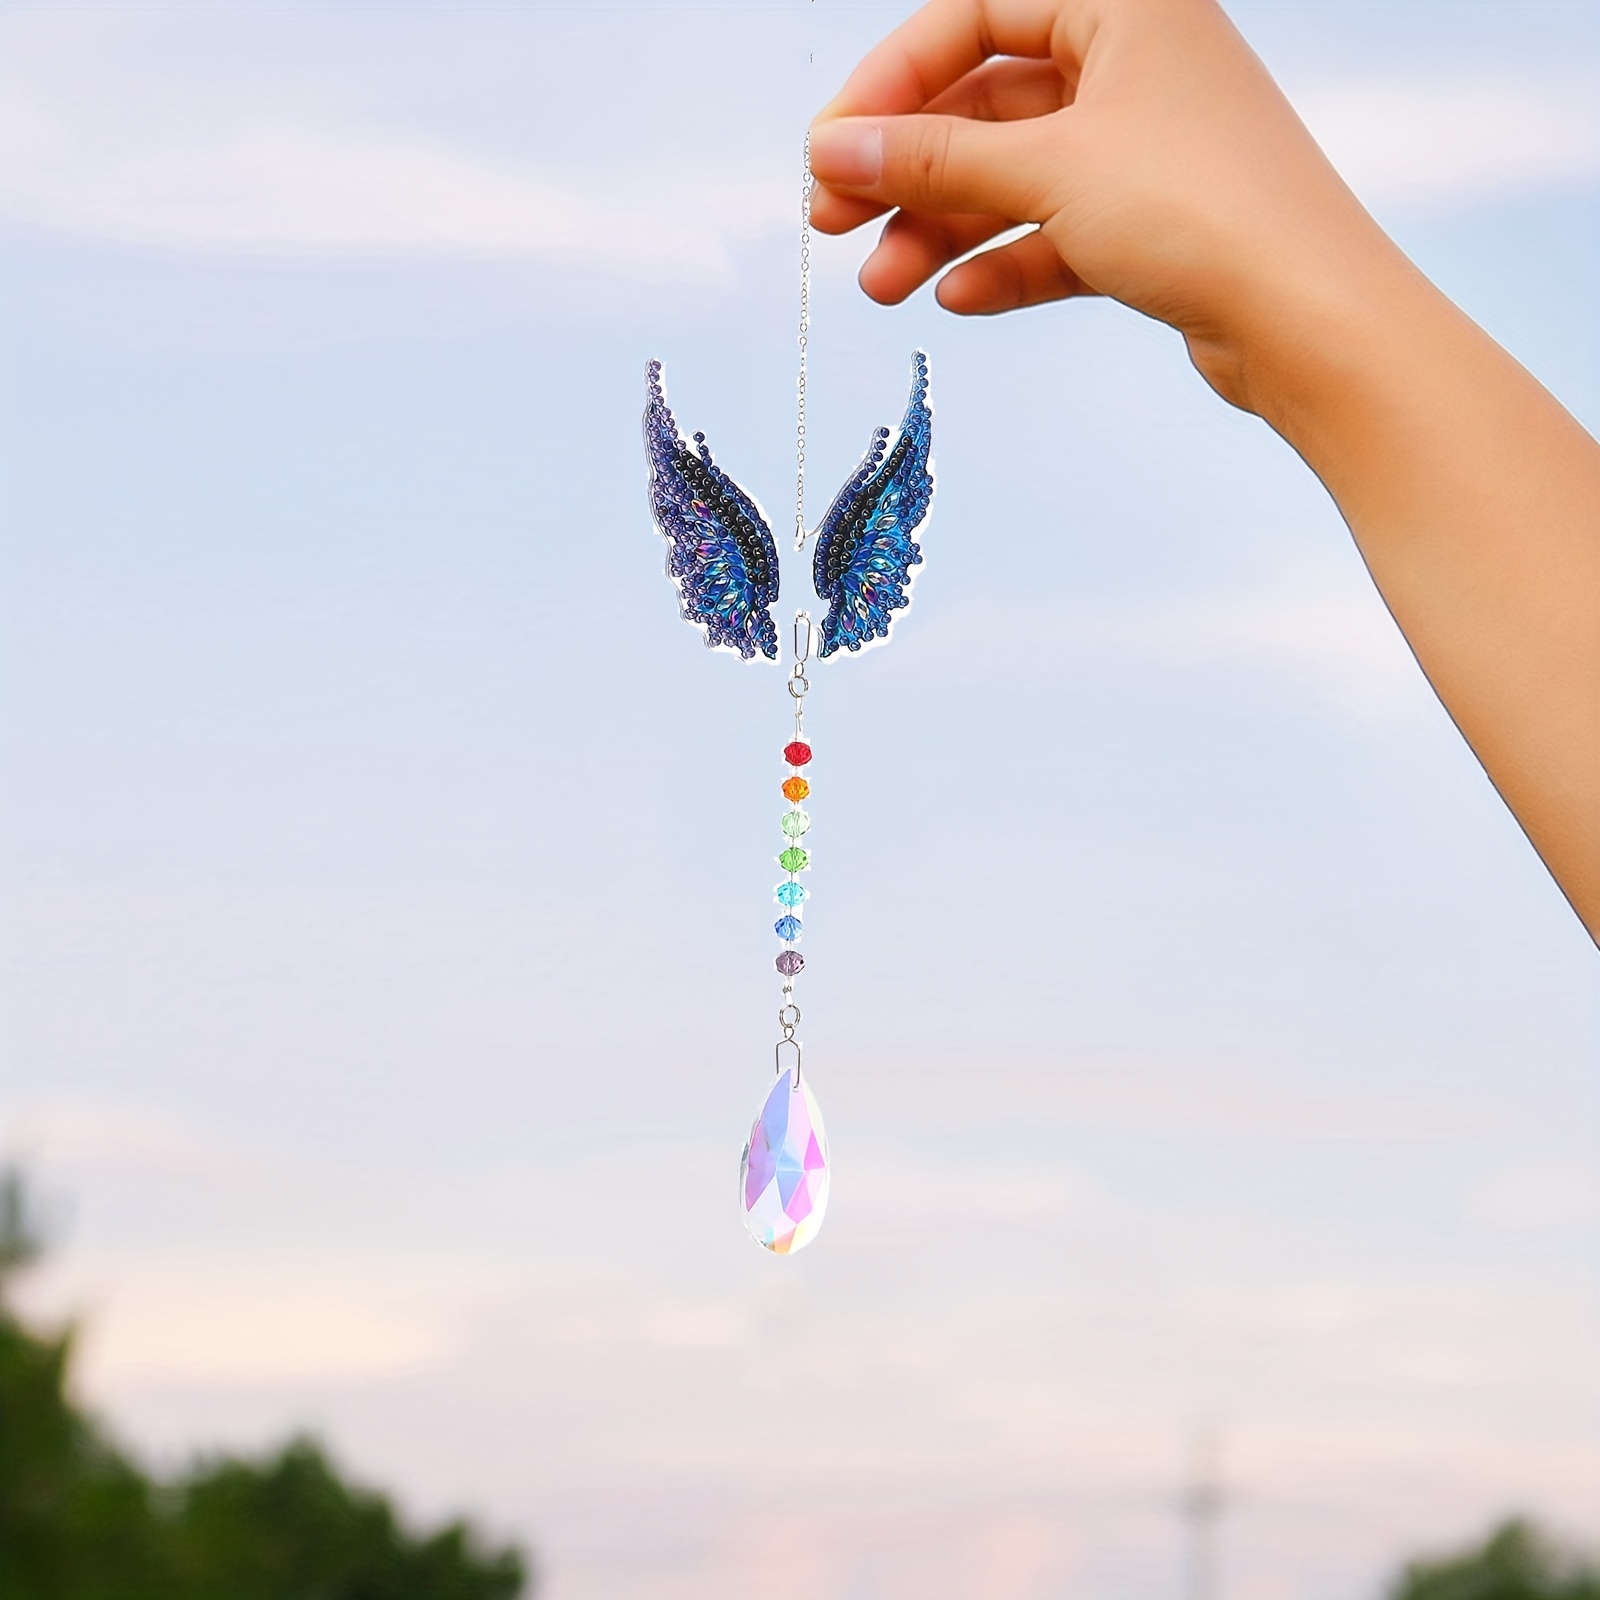 2 Pcs Diamond Painting Suncatcher Art DIY Wind Chime Kit Double Sided 5D  Butterfly and Hummingbird Diamond Painting Wind Chimes Sun Catchers Hanging